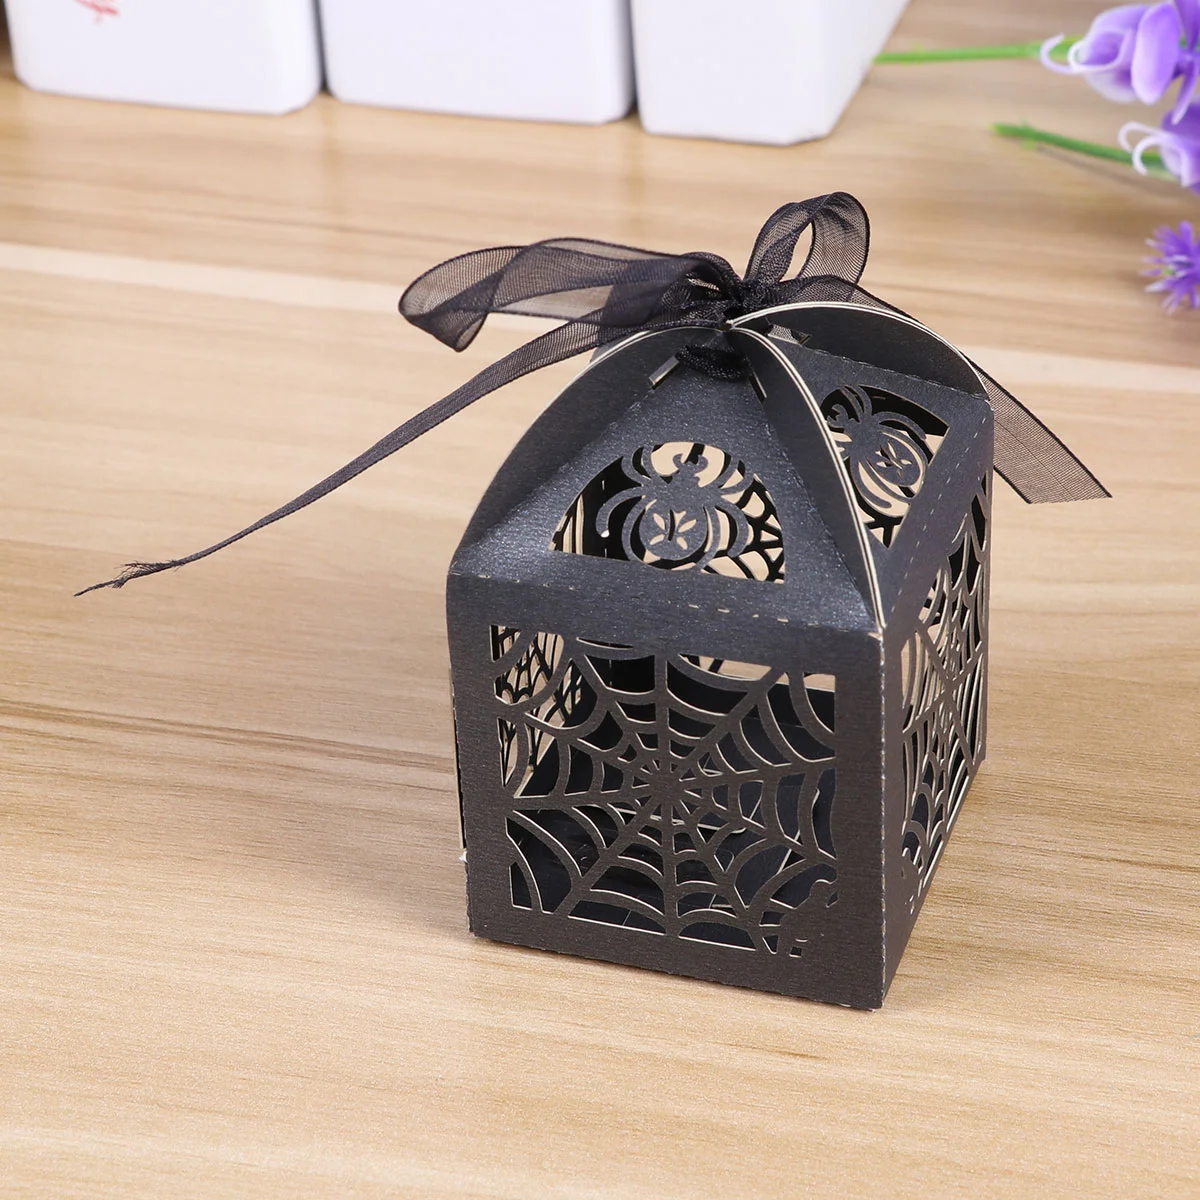 

Boxes Gift Candybox Favor Party Treat Chocolate Pouch Bags Goodie Wrapping Web Wedding Spider Lace Packaging Hollow Ribbonyou